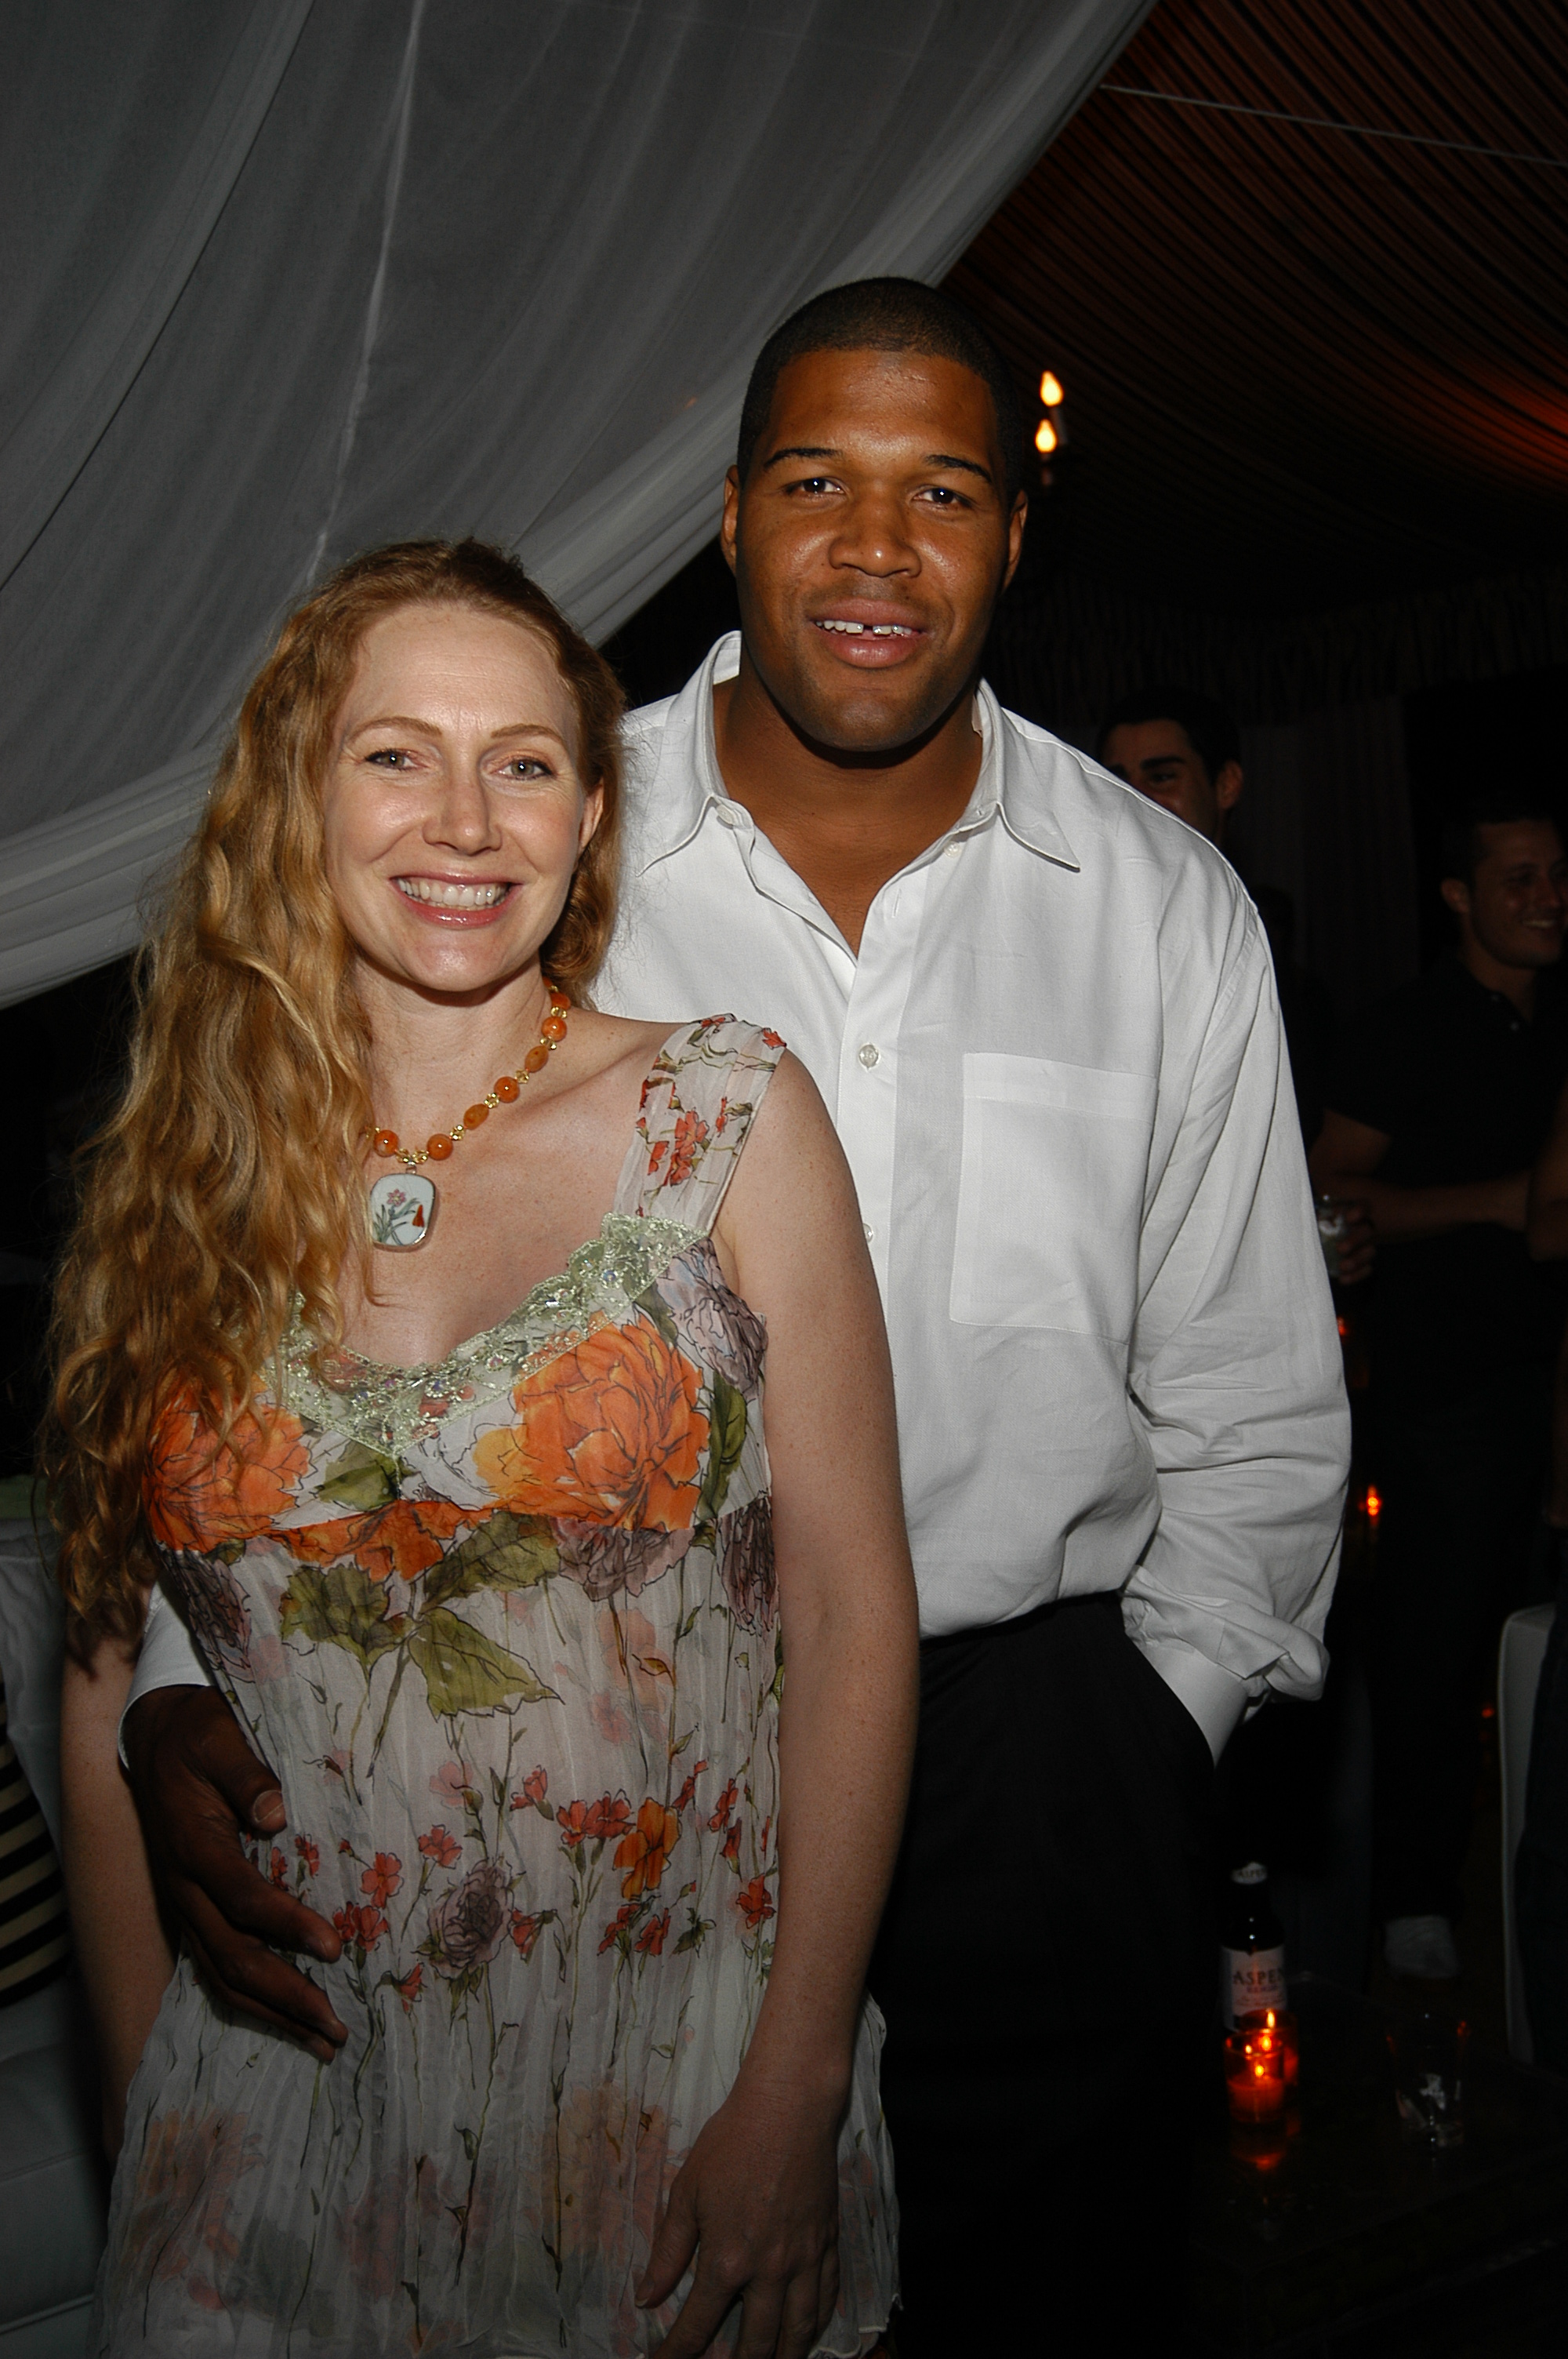 Jean and Michael Strahan at a post-screening dinner celebrating "Riding Giants" on July 2, 2004, in Southampton, New York | Source: Getty Images